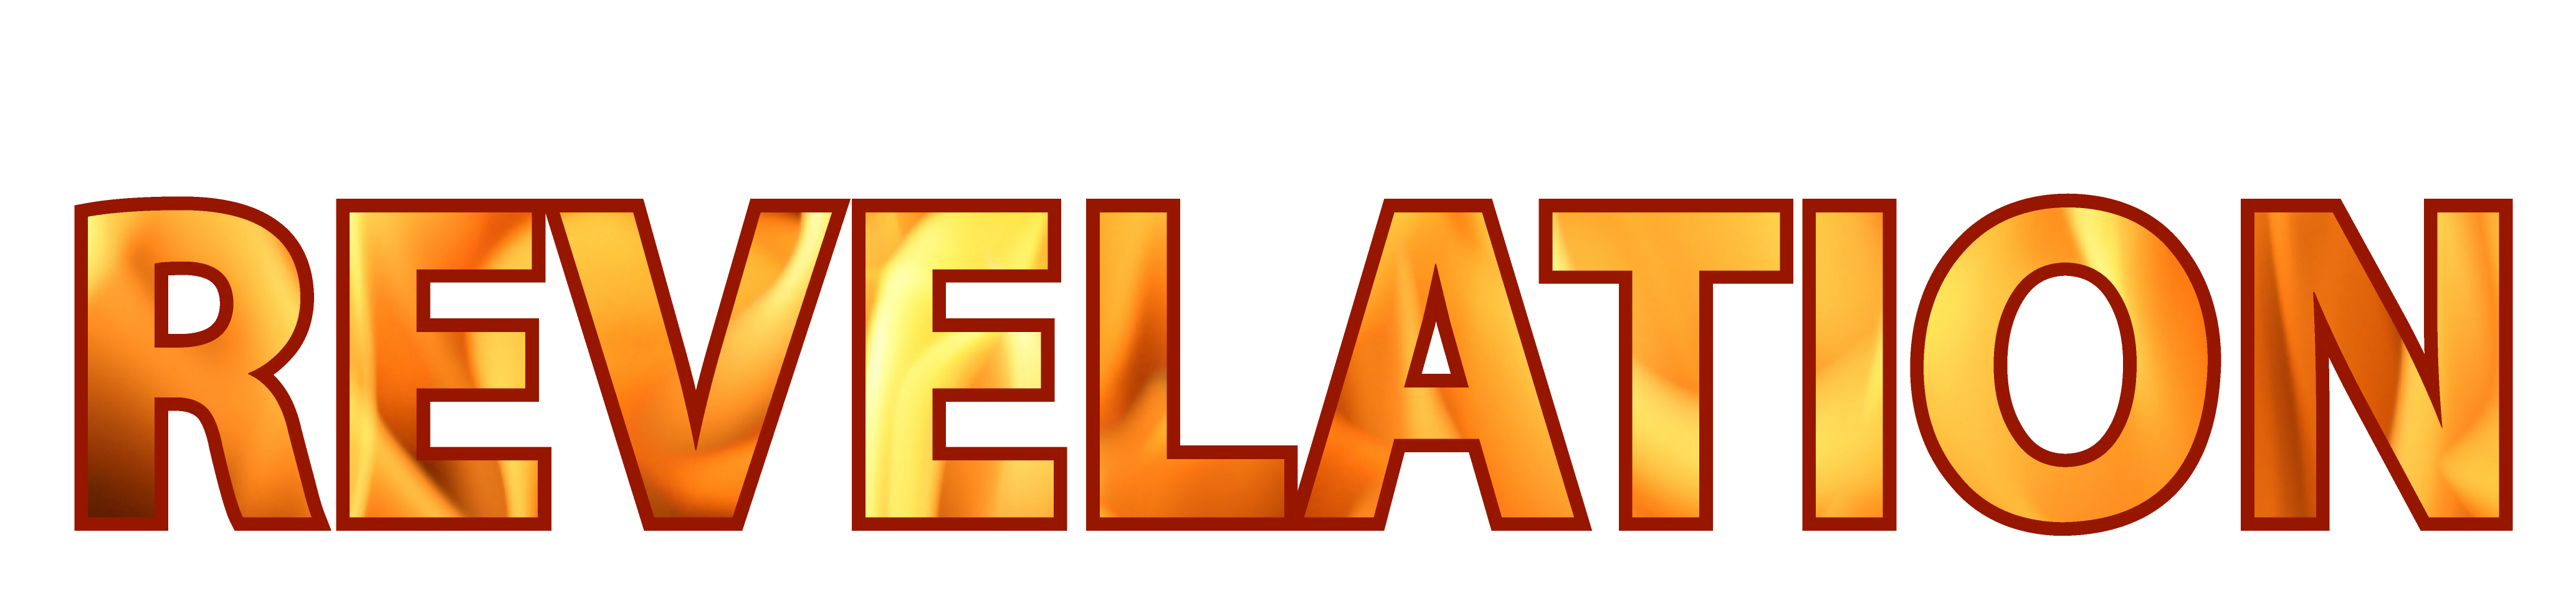 book of revelation clipart - photo #40